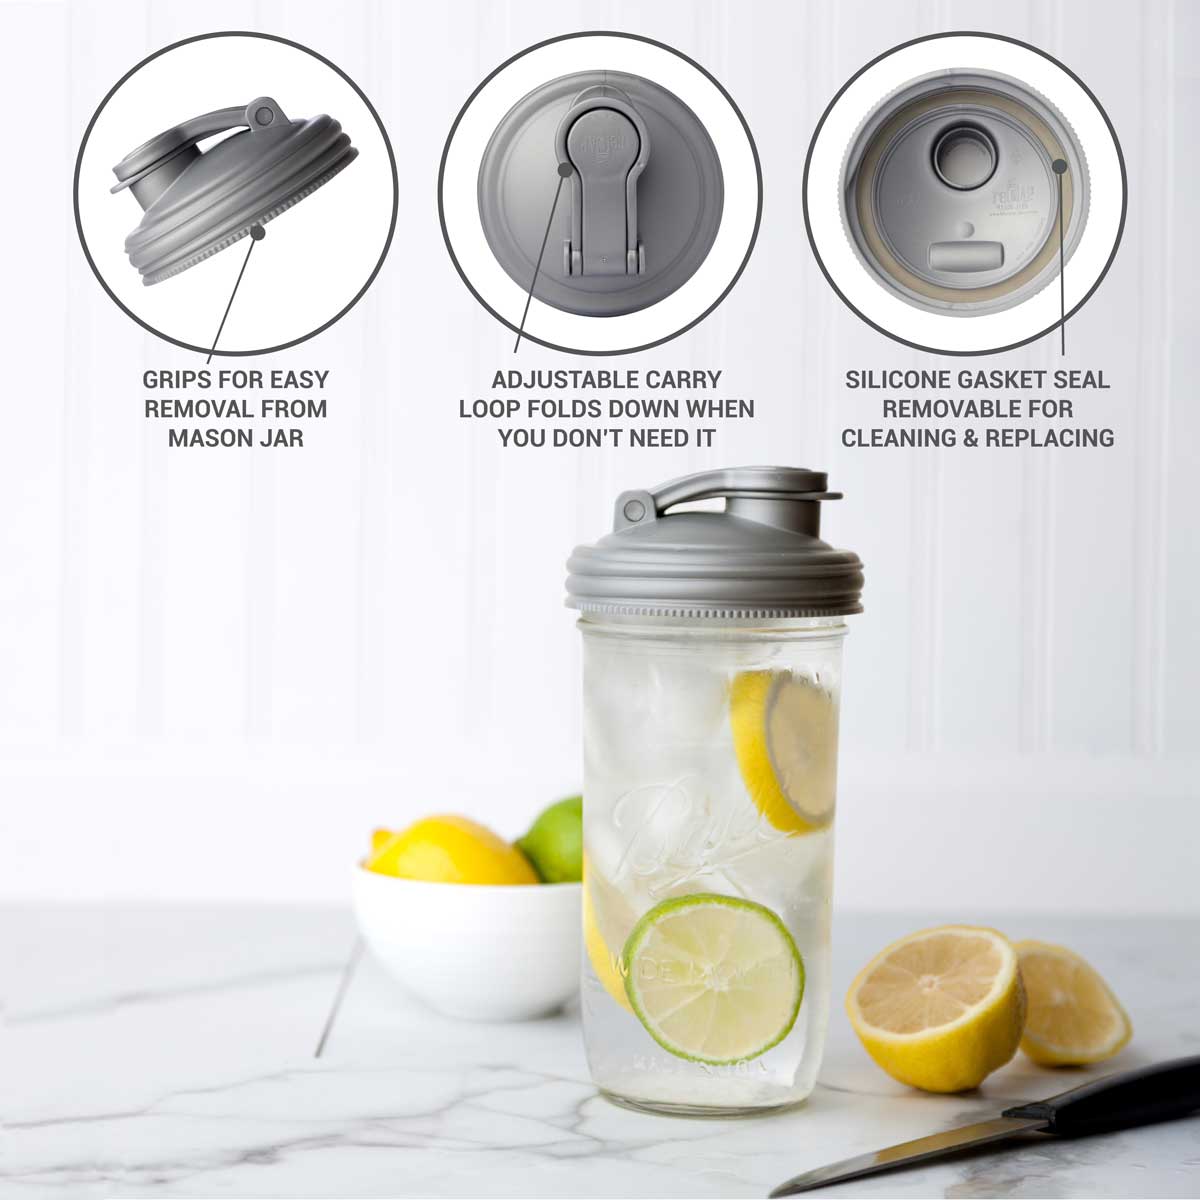 Ball Mason Jar Lids, Mason Jar Drinking Glasses 16 OZ, Set of 2 Mason Jar  Cups with Lids and Straws, for Smoothies, Juices, Honey, Cocktail, Spices